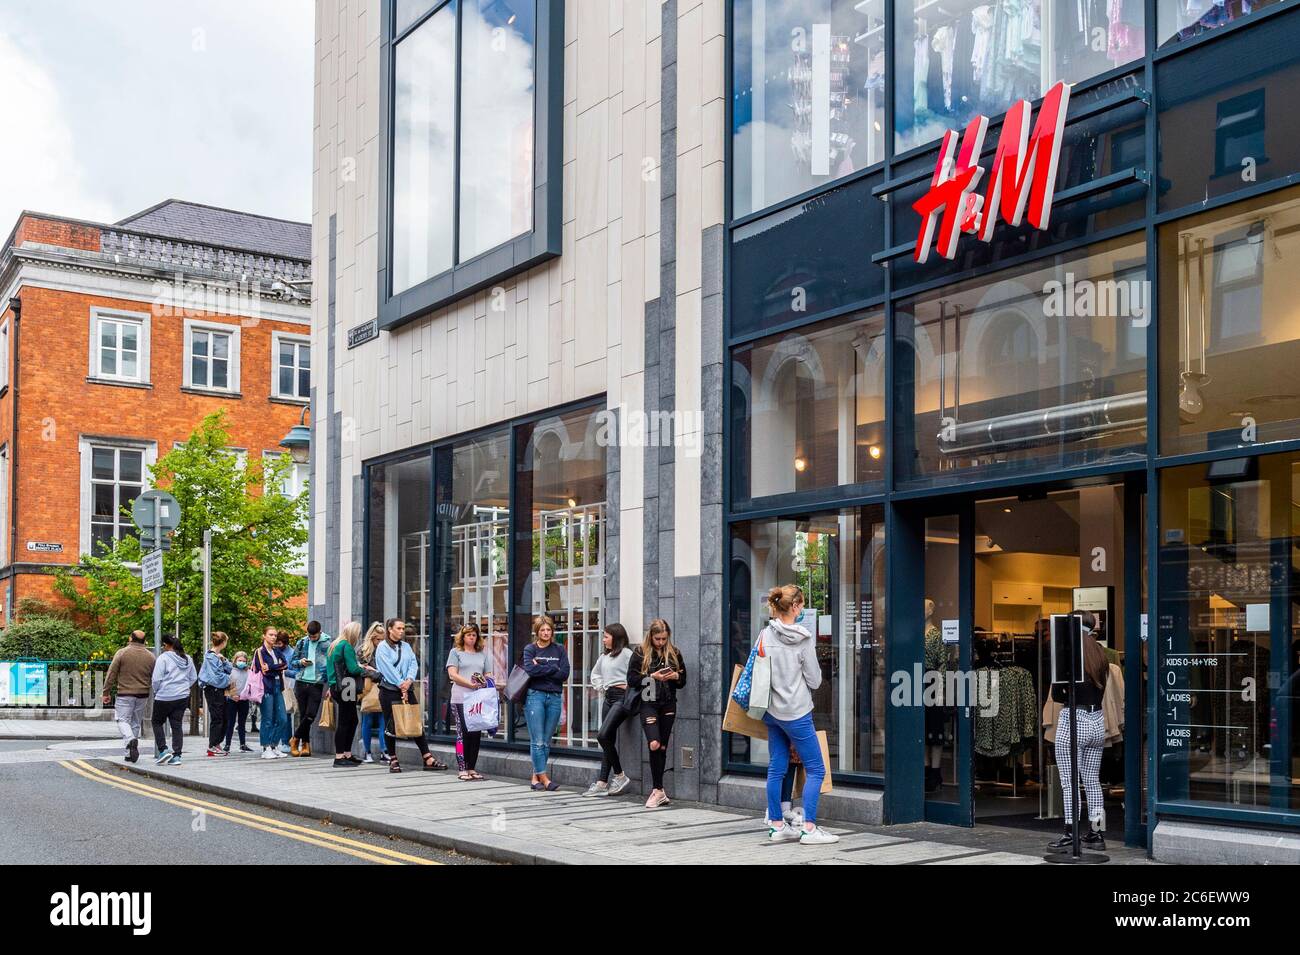 Cork, Ireland. 9th July, 2020. H&M clothes store in Opera Lane, Cork city, was open today with a big queue of shoppers waiting to enter the store. H&M is closing 170 of its 5000 worldwide stores and it is unclear if the Opera Lane shop is facing the axe. Credit: AG News/Alamy Live News Stock Photo